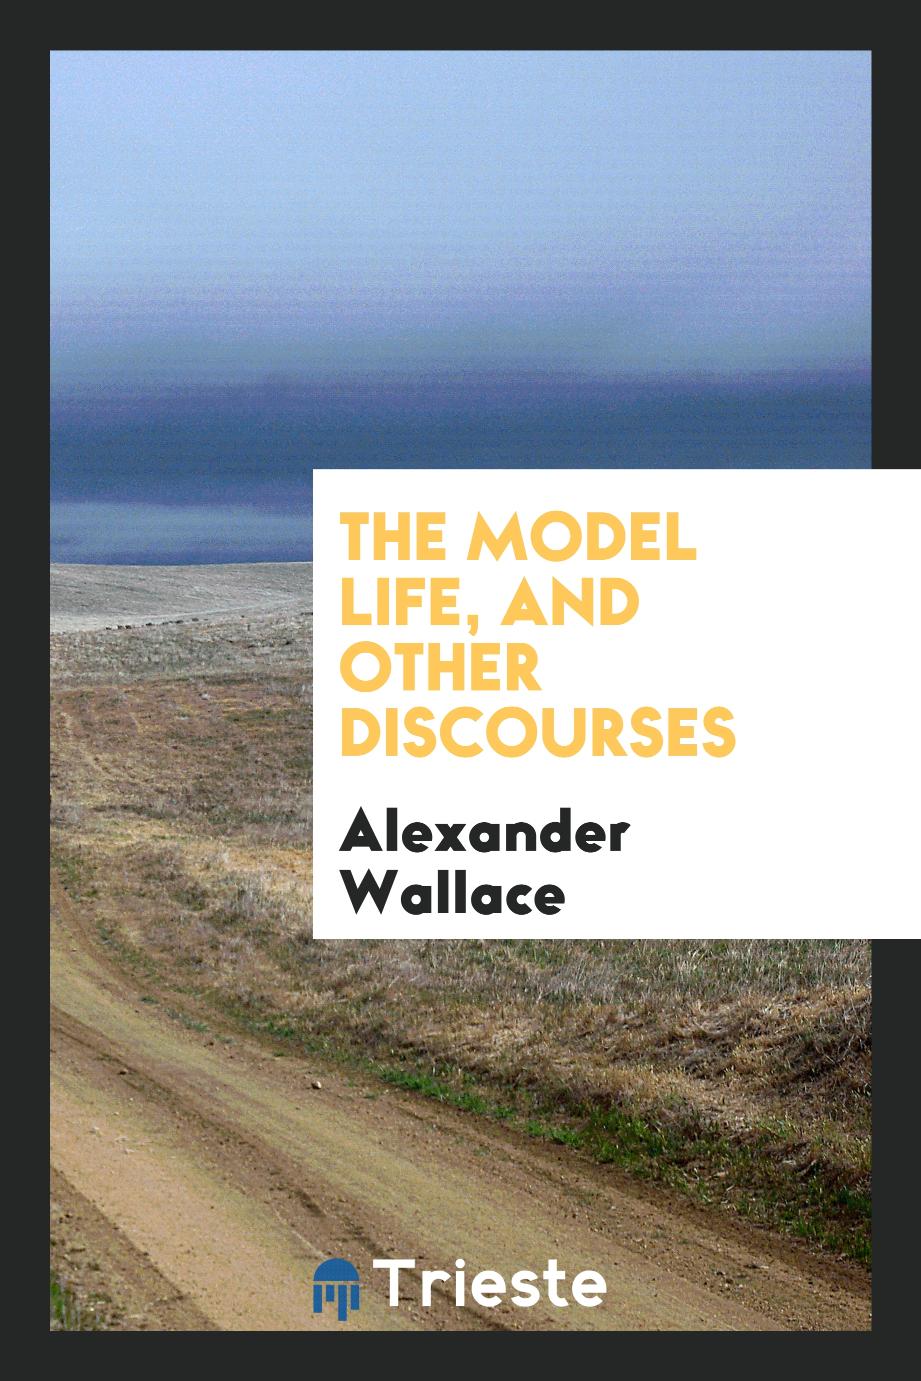 The Model Life, and Other Discourses